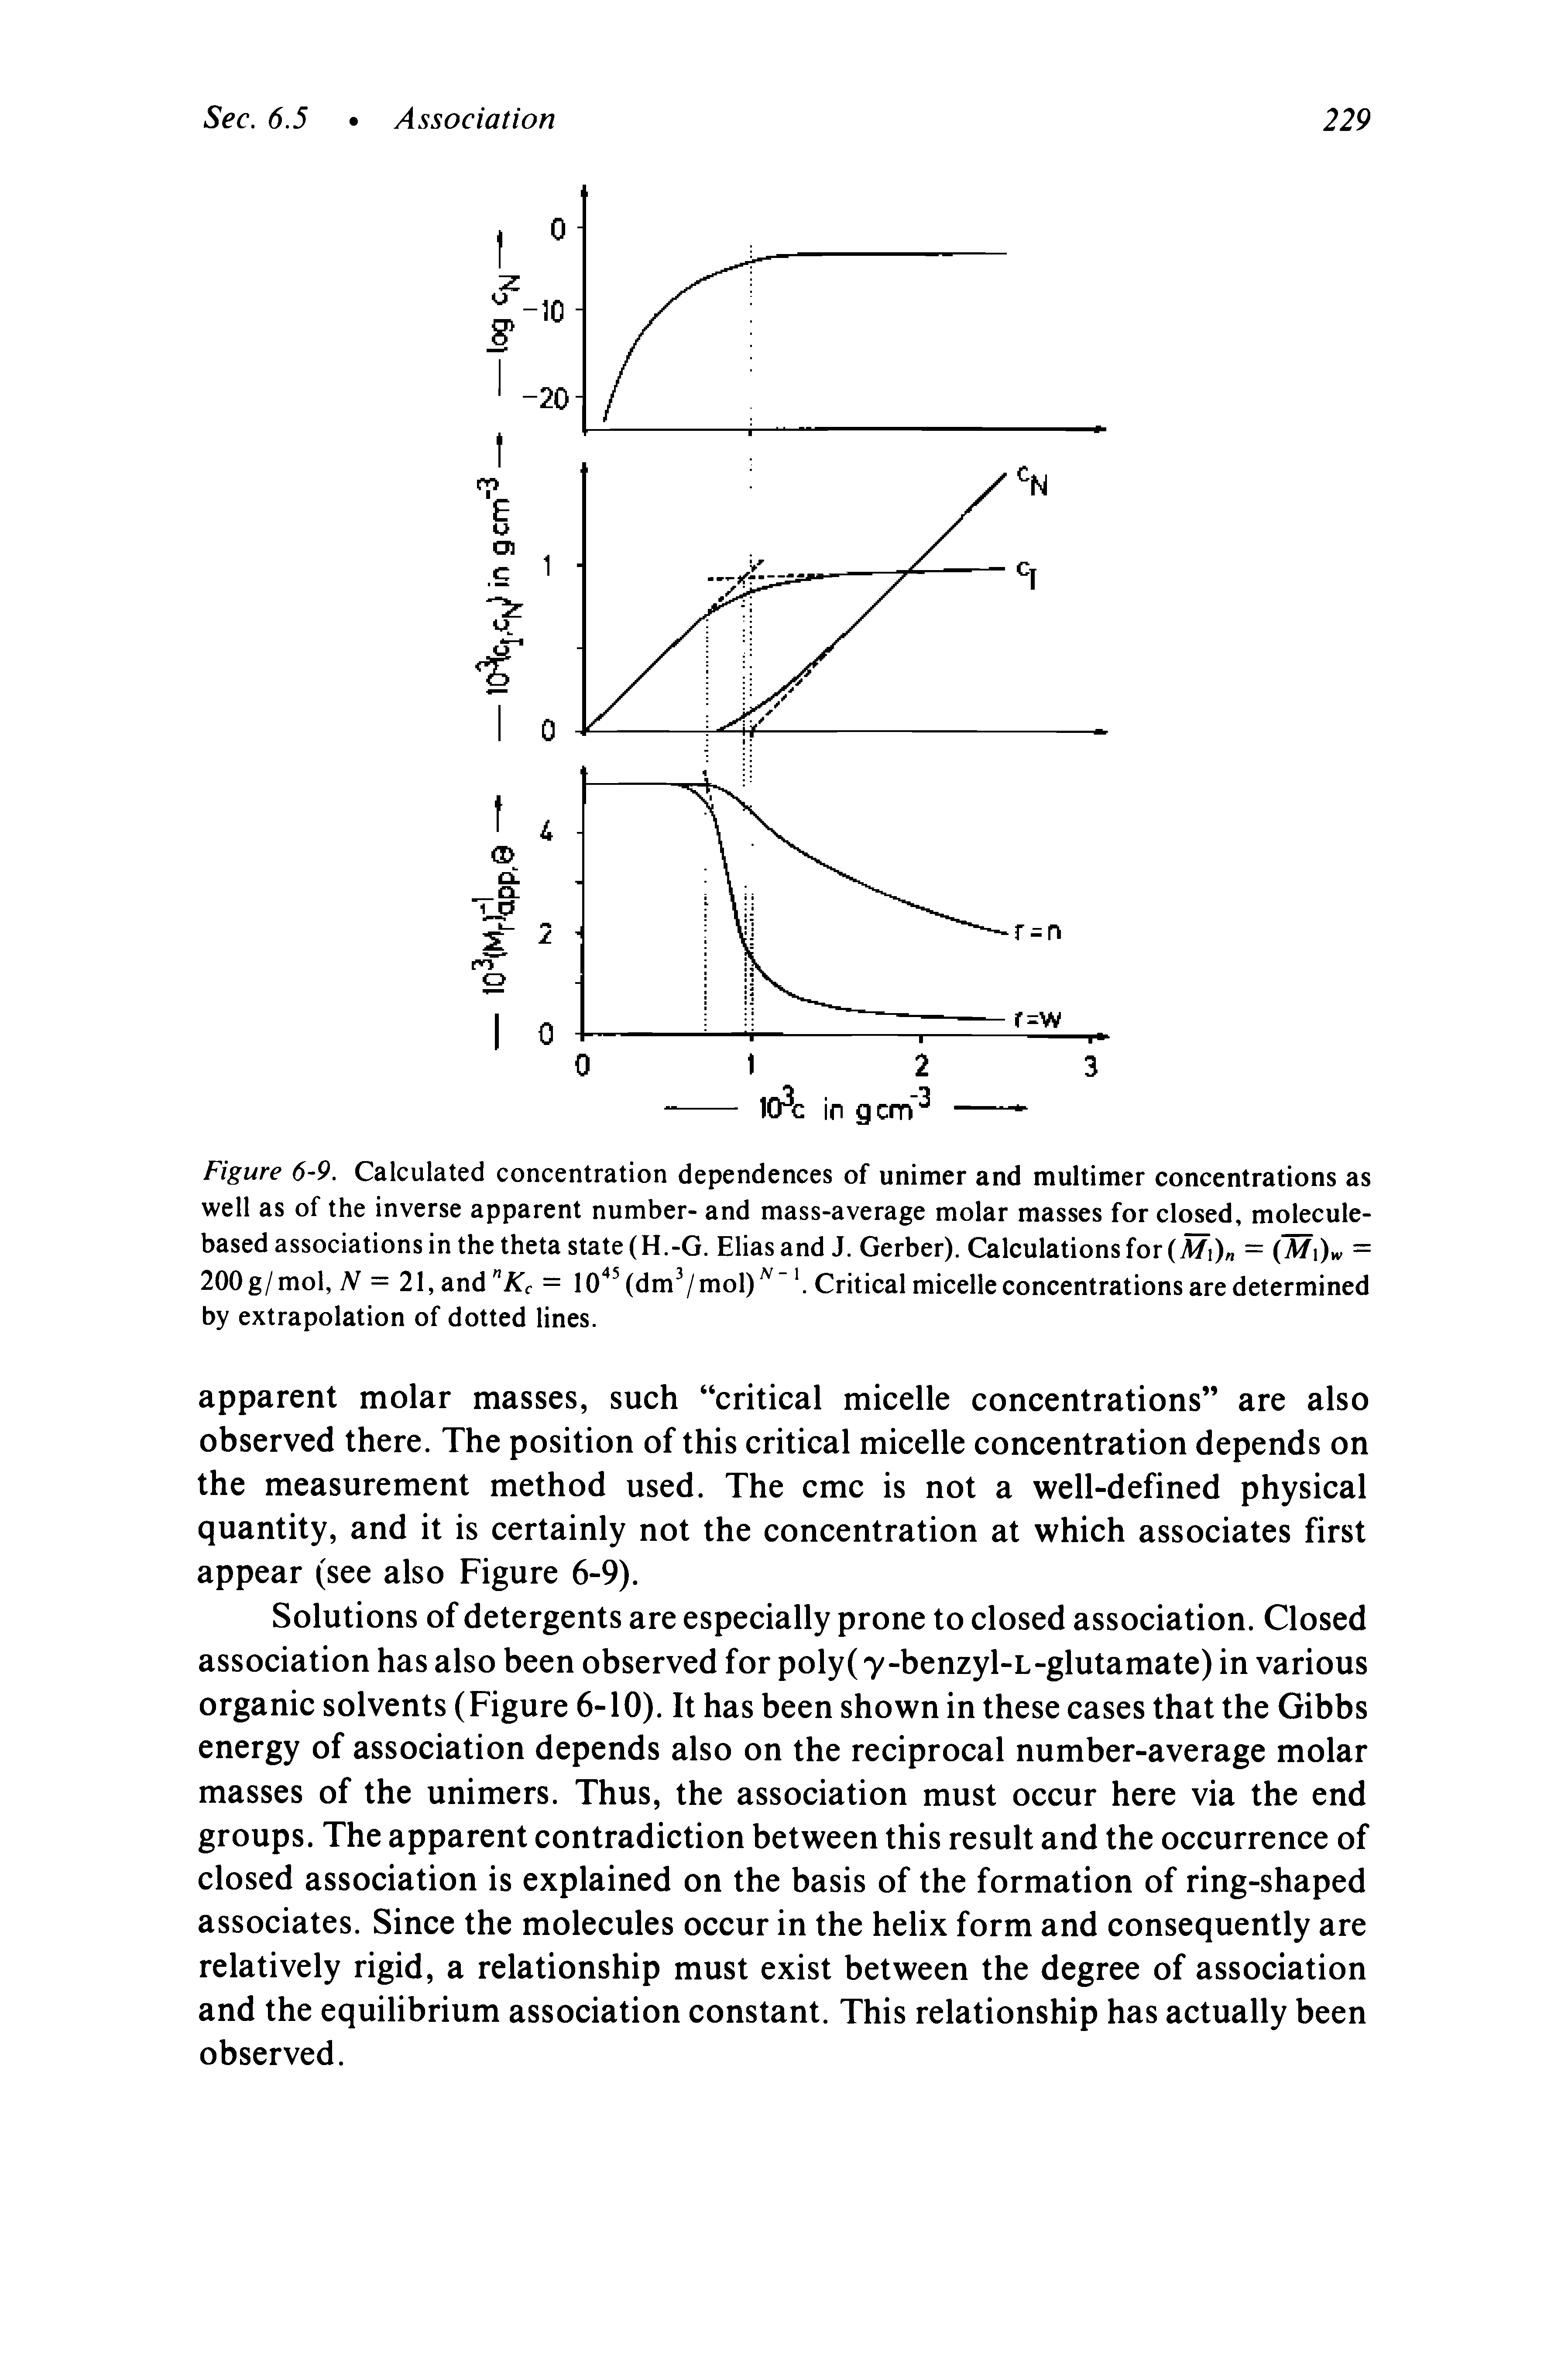 Figure 6-9. Calculated concentration dependences of unimer and multimer concentrations as well as of the inverse apparent number- and mass-average molar masses for closed, molecule-based associations in the theta state (H.-G. Elias and J. Gerber). Calculations for (Mi) = (M )w = 200g/mol, yv = 21,and A f = 10 Cdm mol) Critical micelle concentrations are determined by extrapolation of dotted lines.